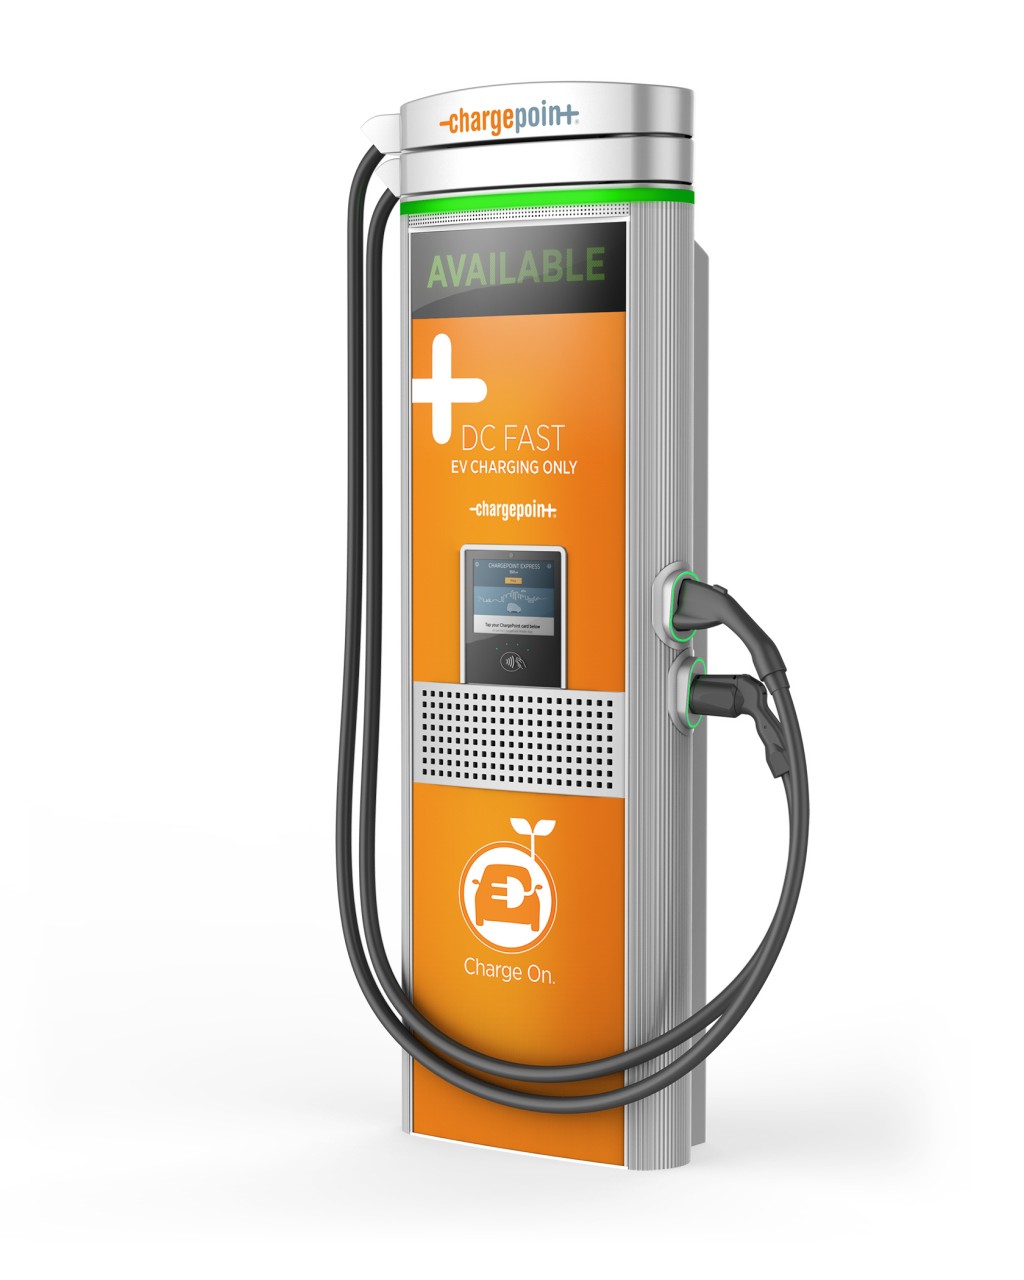 Image ChargePoint Express Plus modular DC fastcharging system for